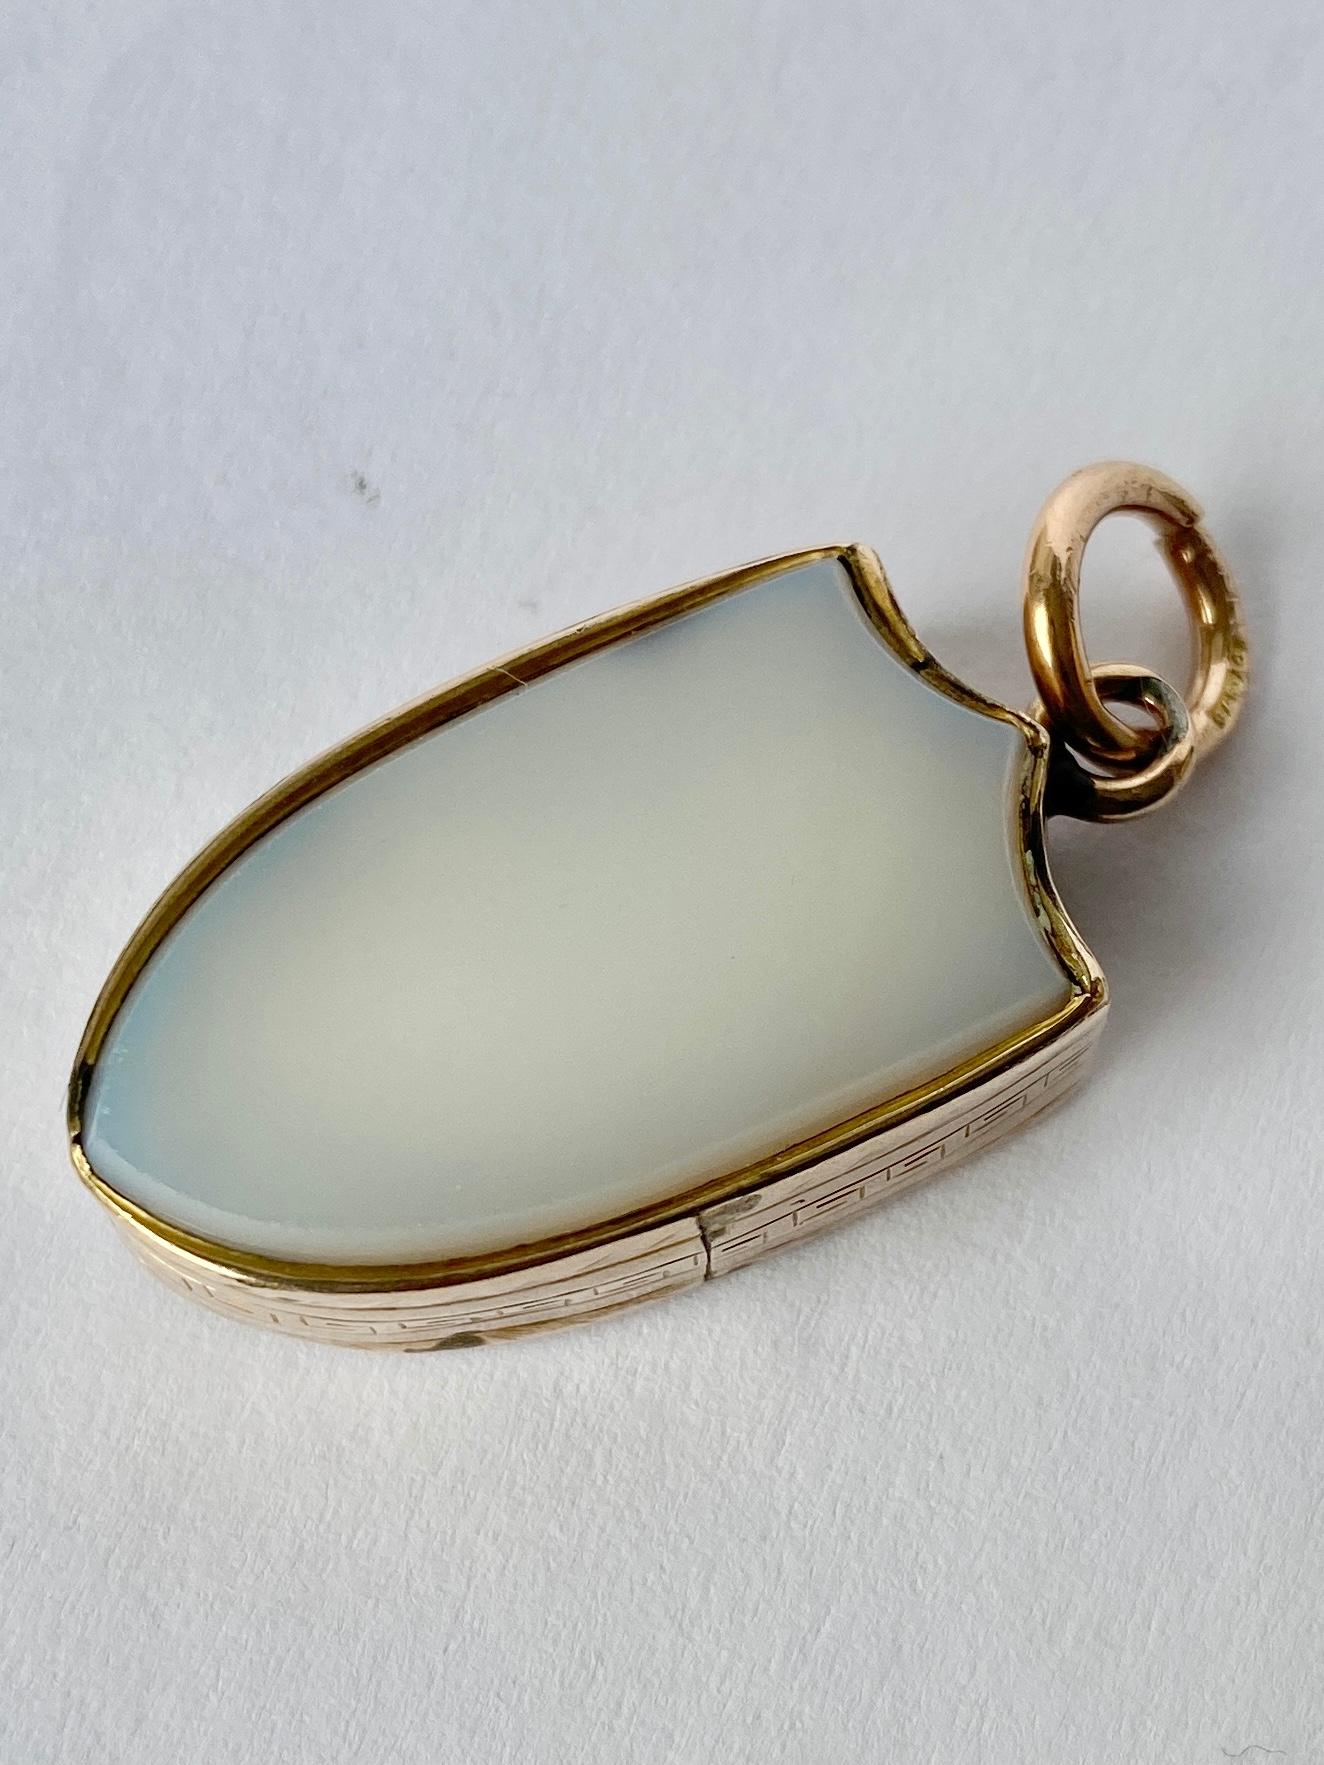 Cabochon Victorian Bloodstone and Chalcedony 9 Carat Fob